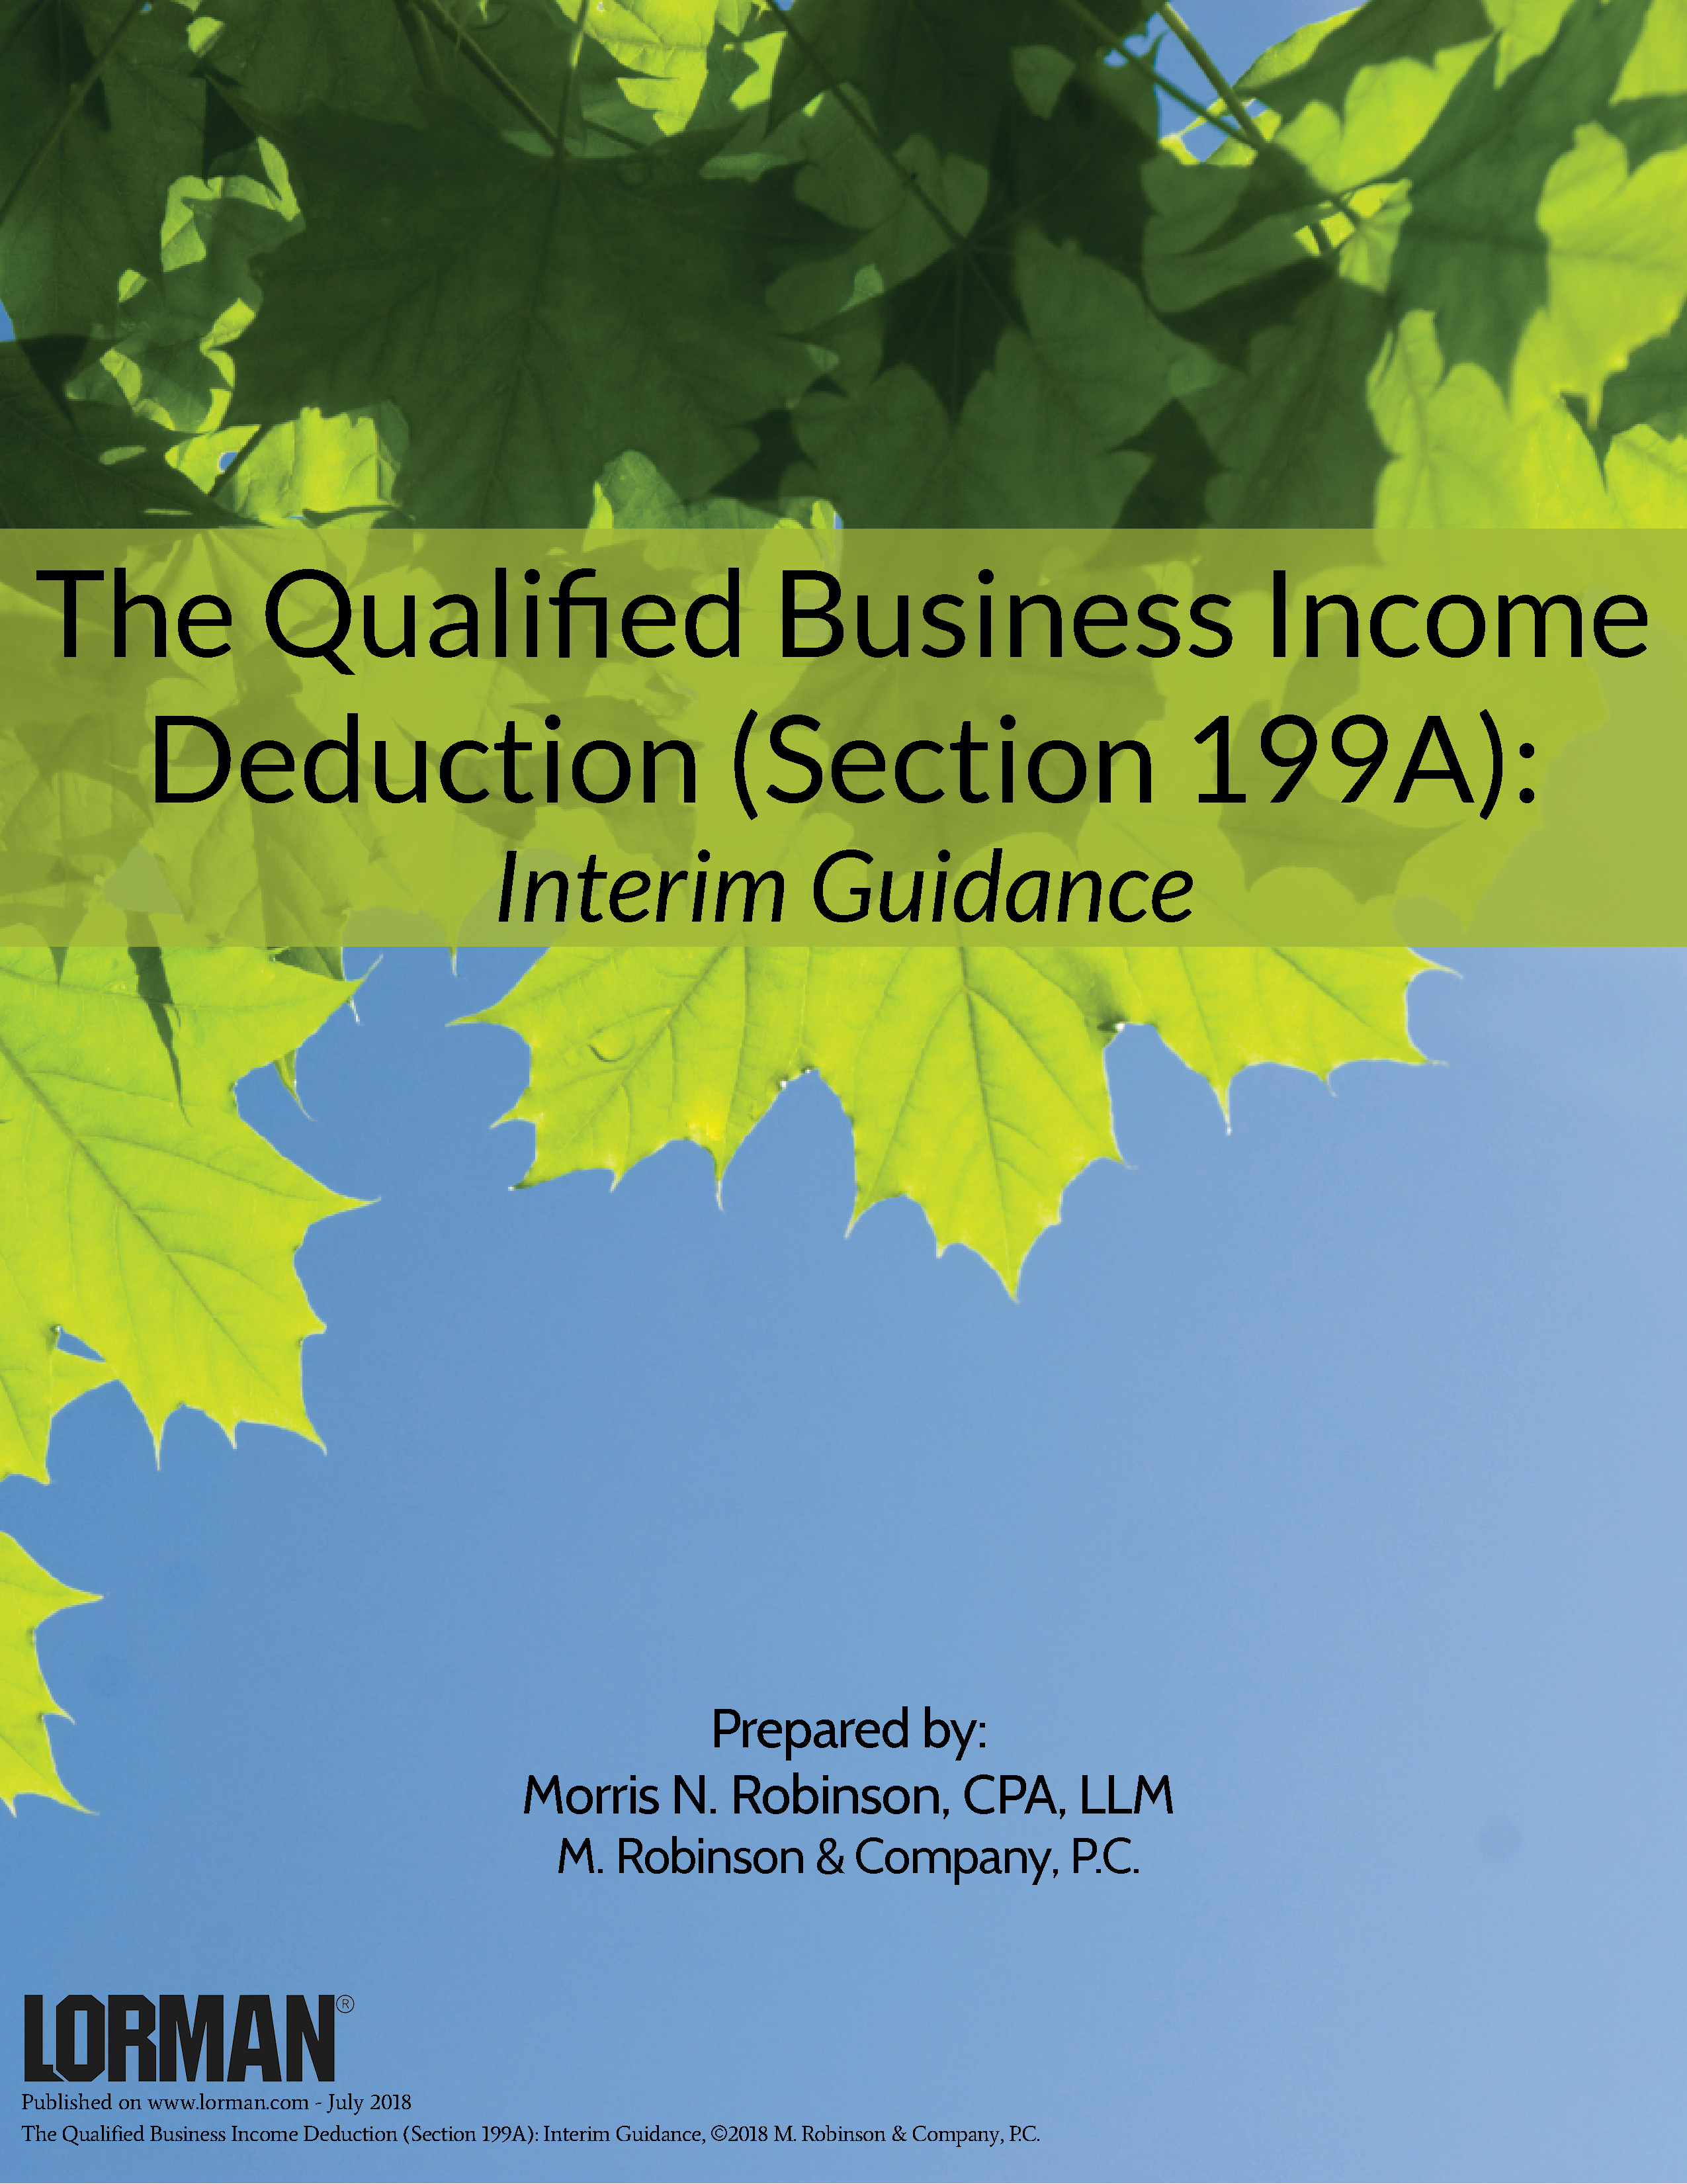 The Qualified Business Income Deduction (Section 199A) - Interim Guidance